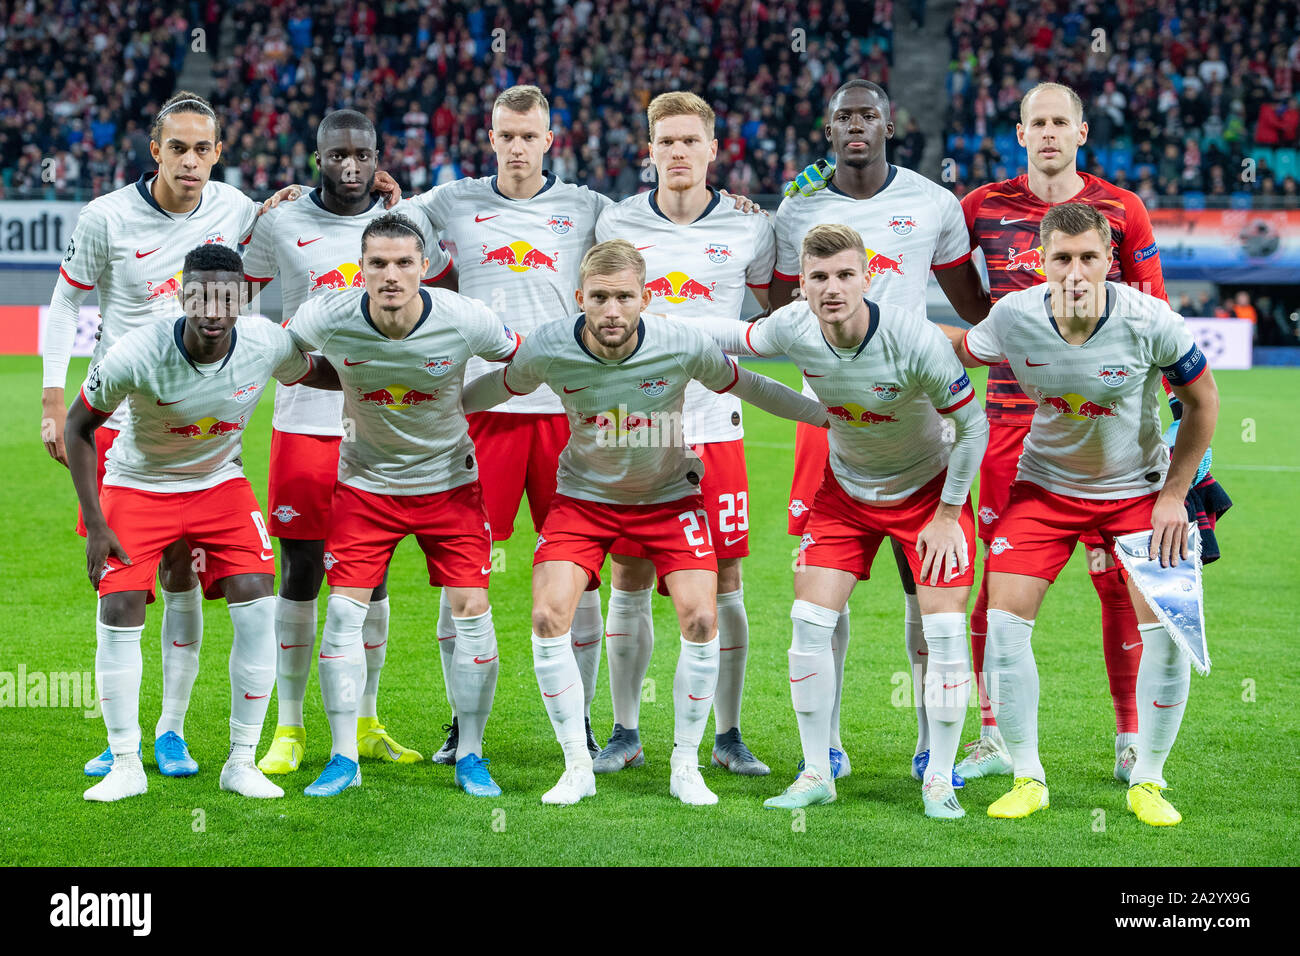 Orleft to right Yussuf POULSEN (L), Dayot UPAMECANO (L), Lukas KLOSTERMANN (L), Marcel HALSTENBERG (L), Nordi MUKIELE (L)), goalkeeper Peter GULACSI (L), uRleft to right Amadou HAIDARA (L), Marcel SABITZER (L), Konrad LAIMER (L), Timo WERNER (L), Willi ORBAN (L), team photo, group picture, team picture, team picture, full figure, landscape, Soccer Champions League, group stage, group G, matchday 2, RB Leipzig (L) - Olympique Lyon (Lyon) 0: 2, on 02.10.2019 in Leipzig/Germany. | Usage worldwide Stock Photo